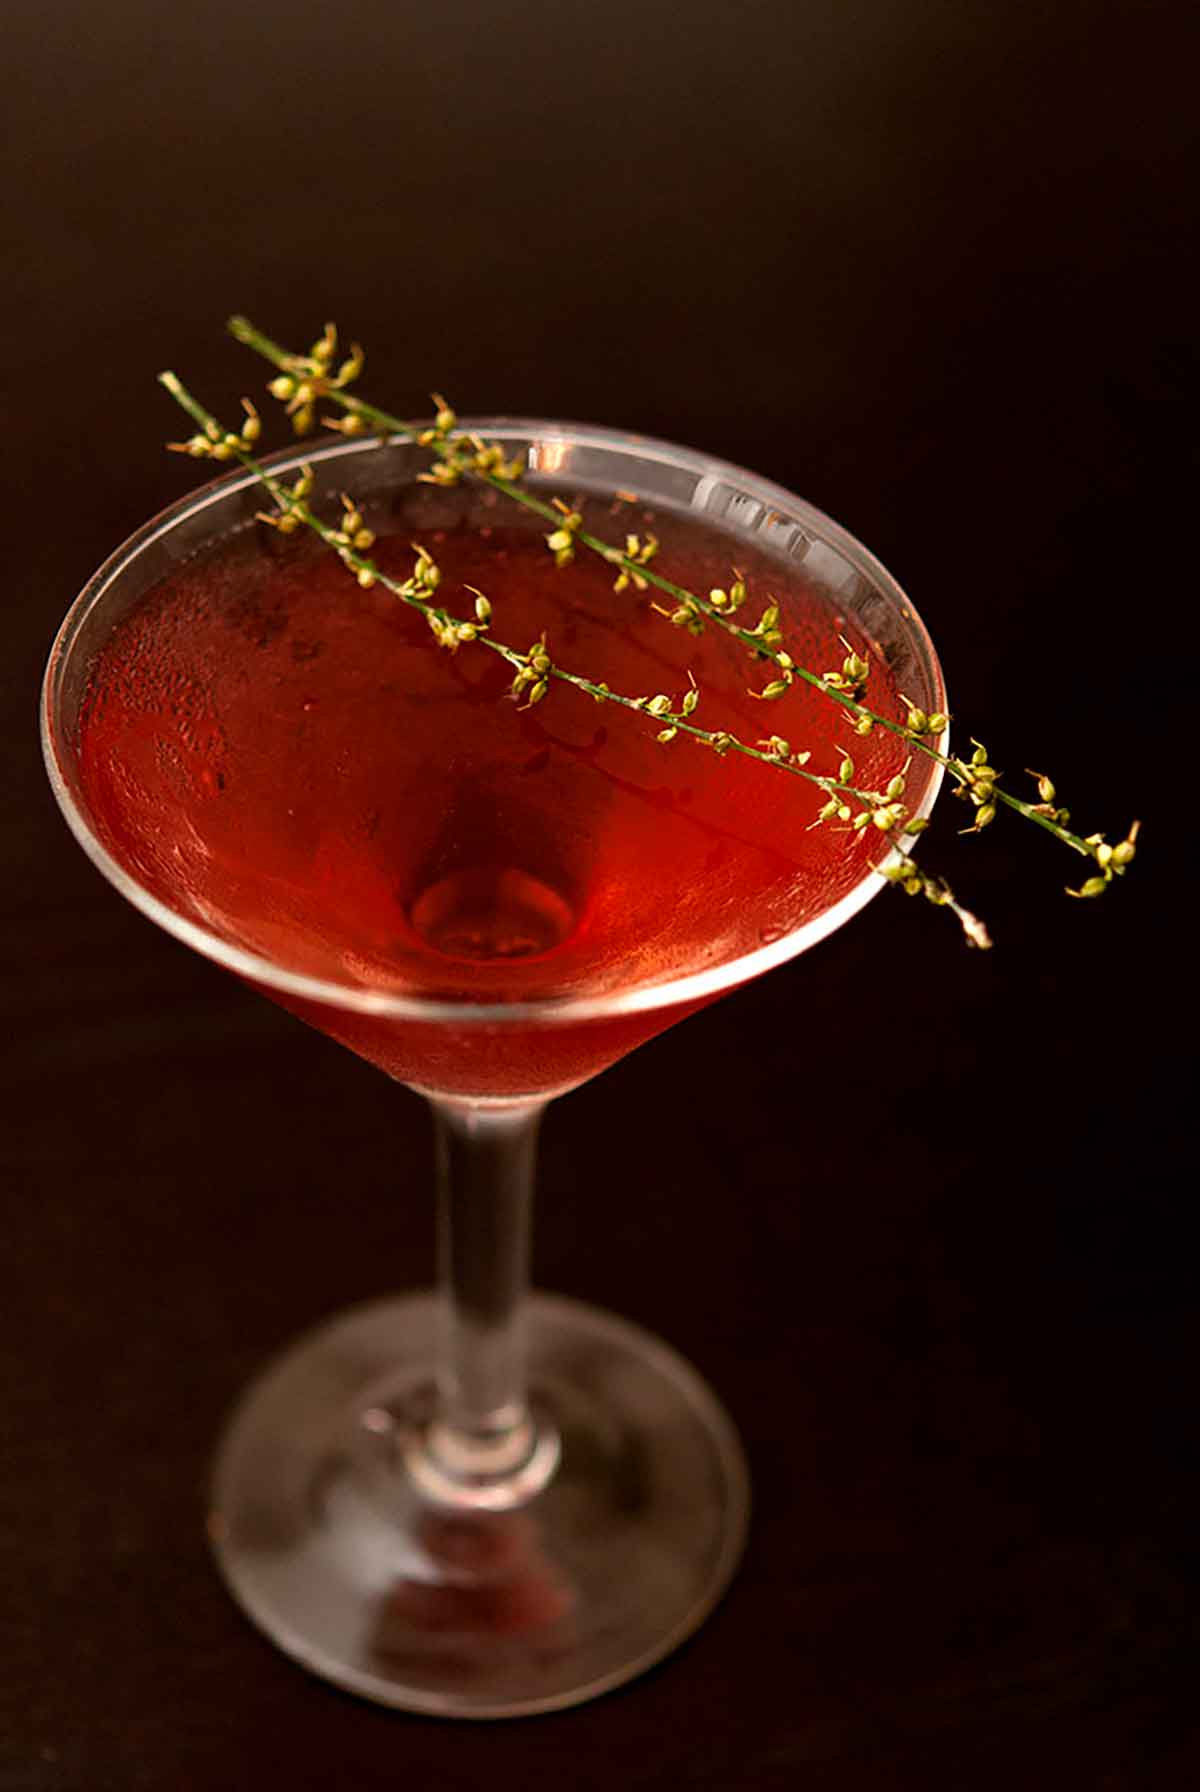 A cocktail in a martini glass, garnished with 2 sprigs of greenery on a dark table.